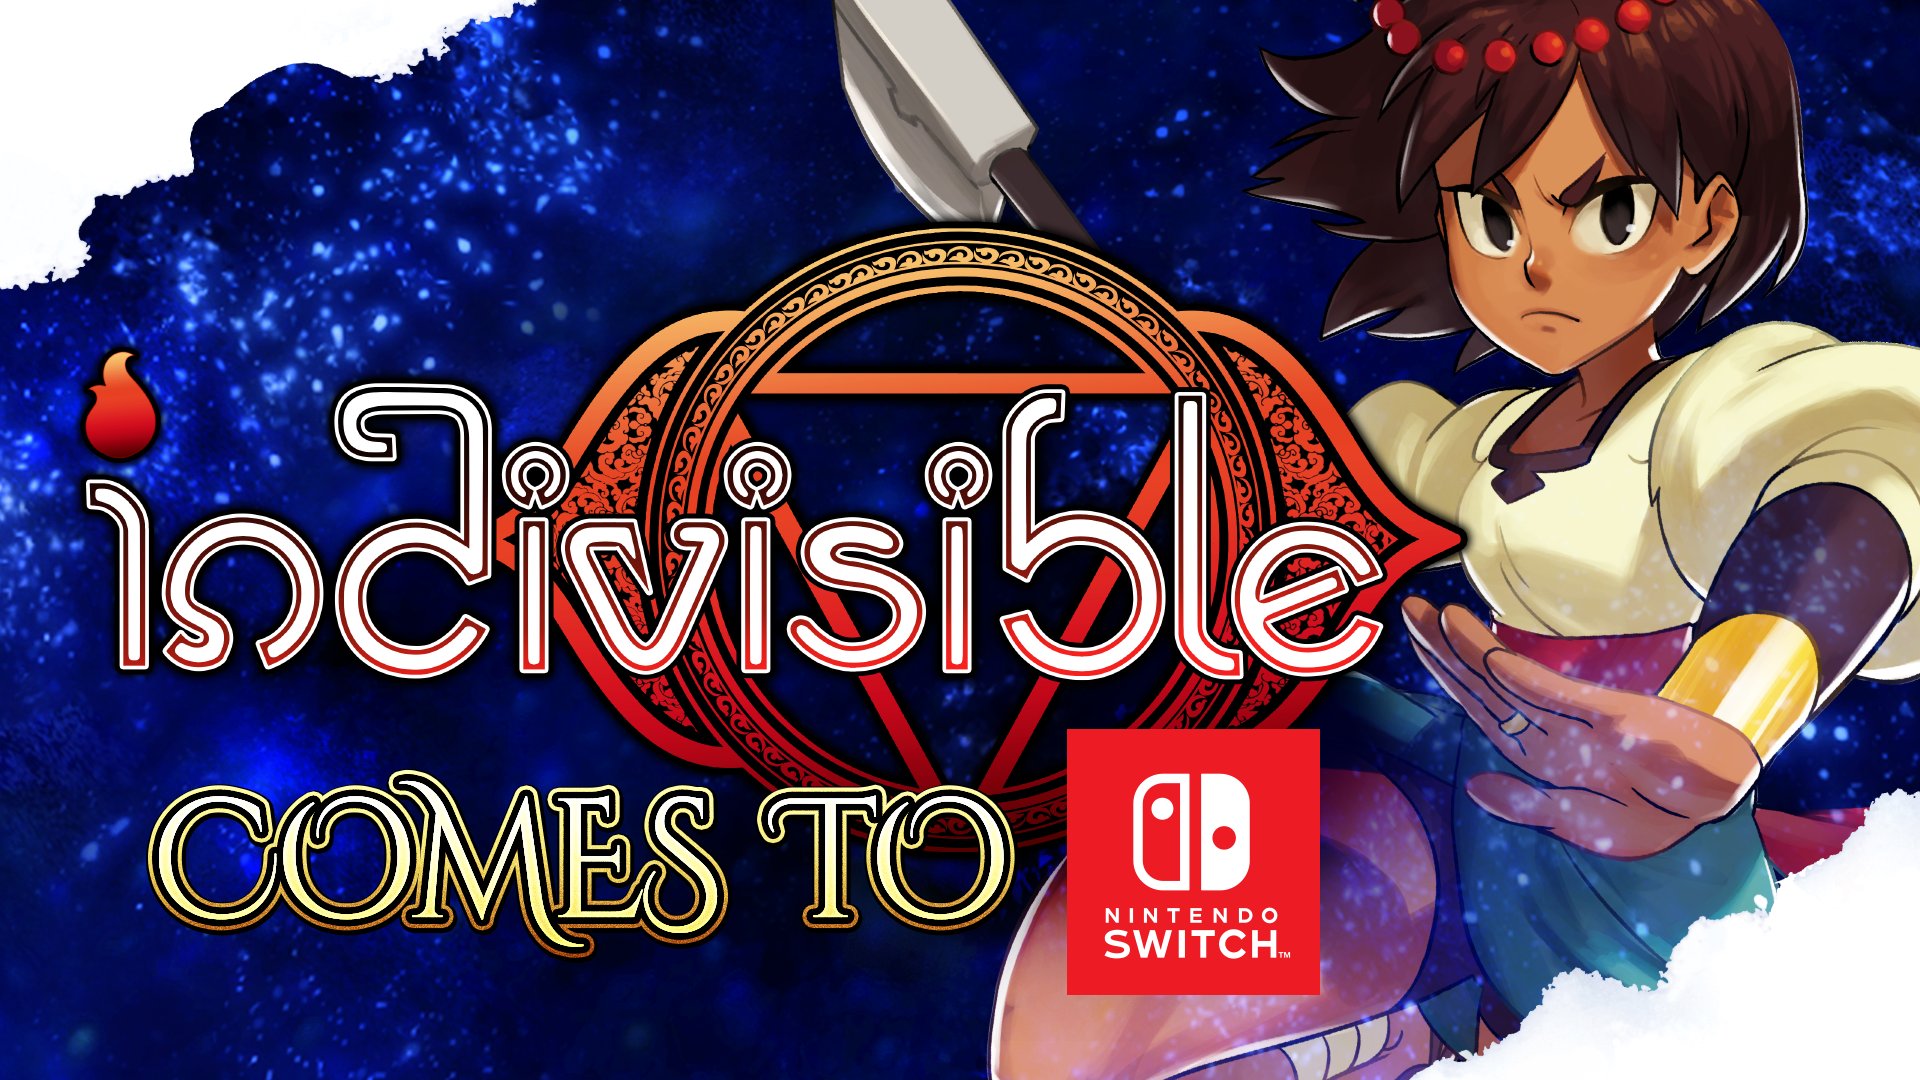 indivisible game switch release date